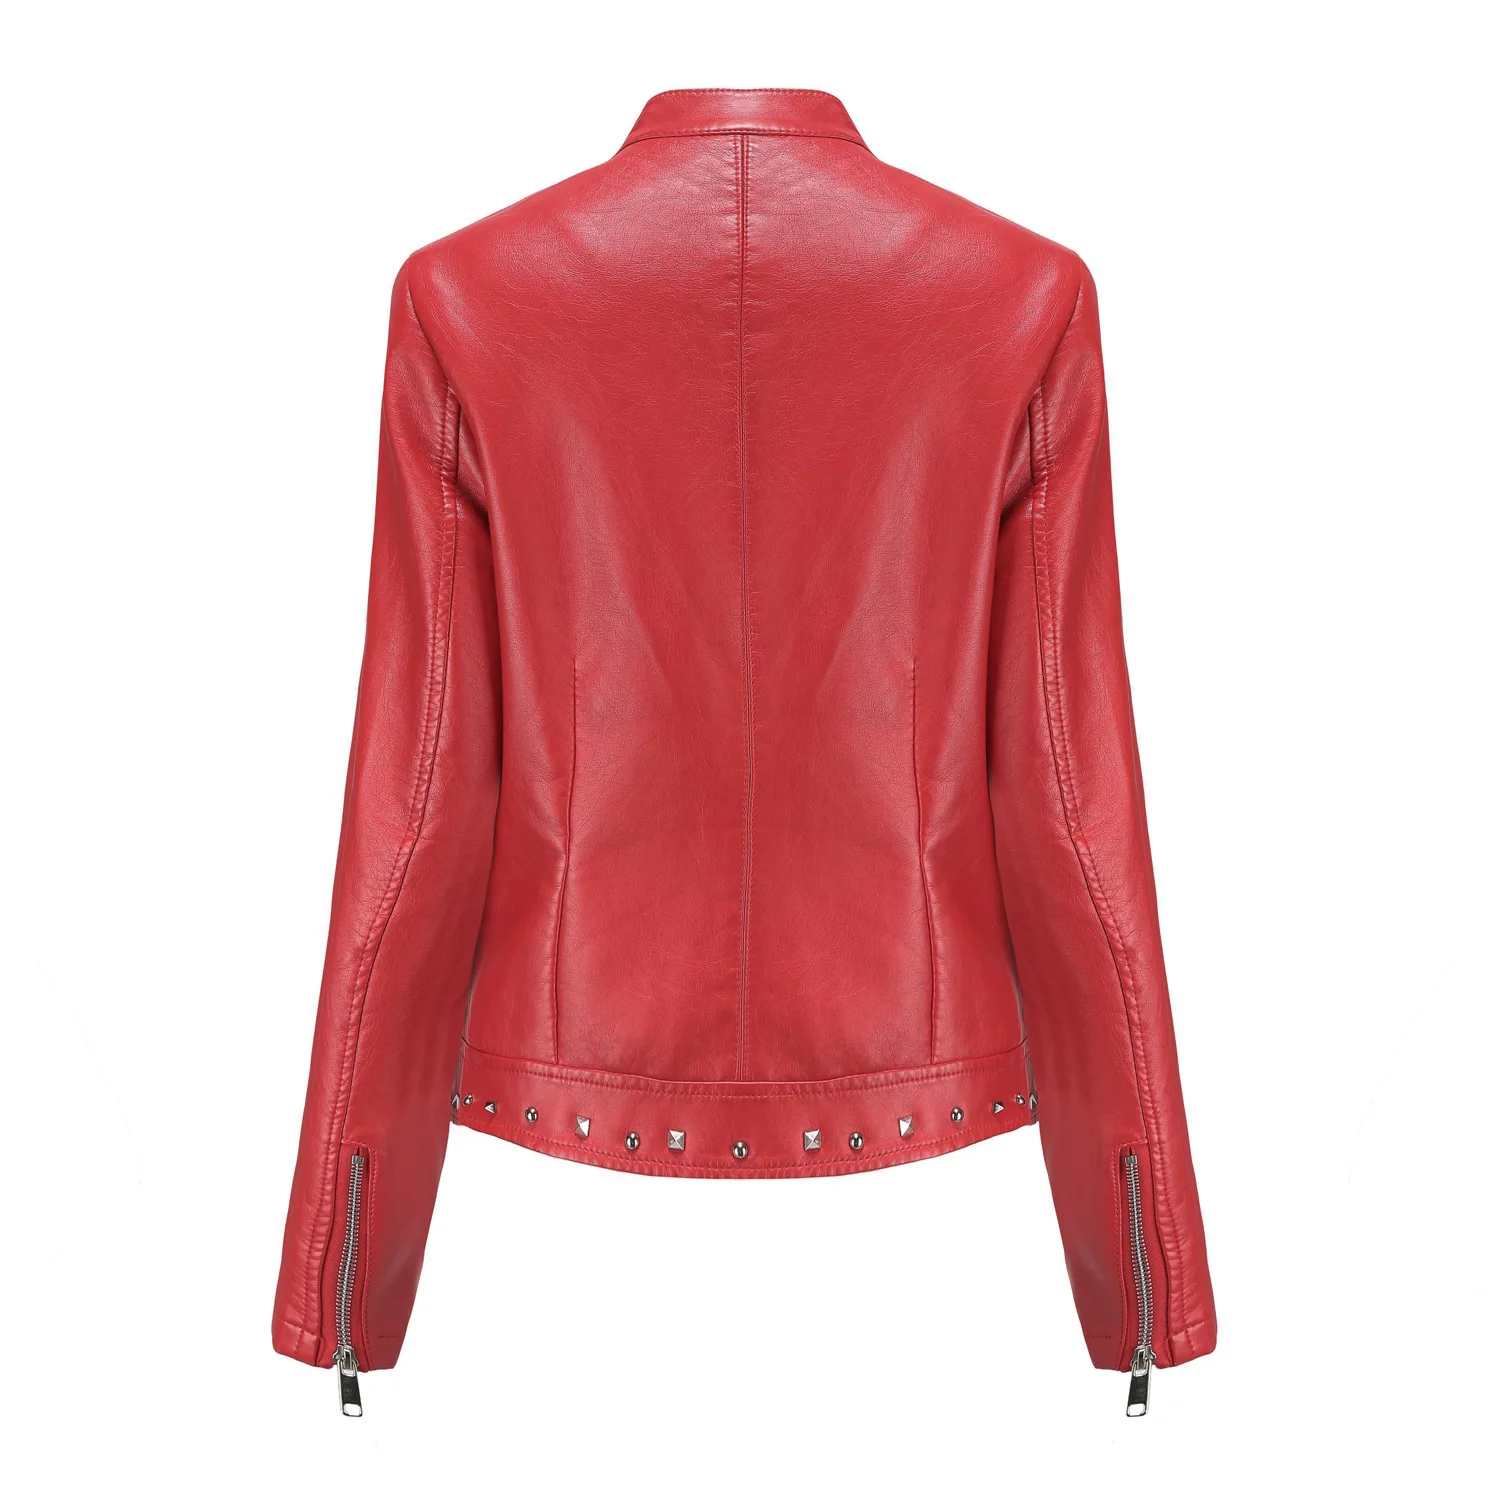 Spring Autumn New Rivet PU Leather Jacket Women Punk Motocycle Jacket Stand-collar Casual Ladies Short Leather Coat Solid S-5XL enlarge